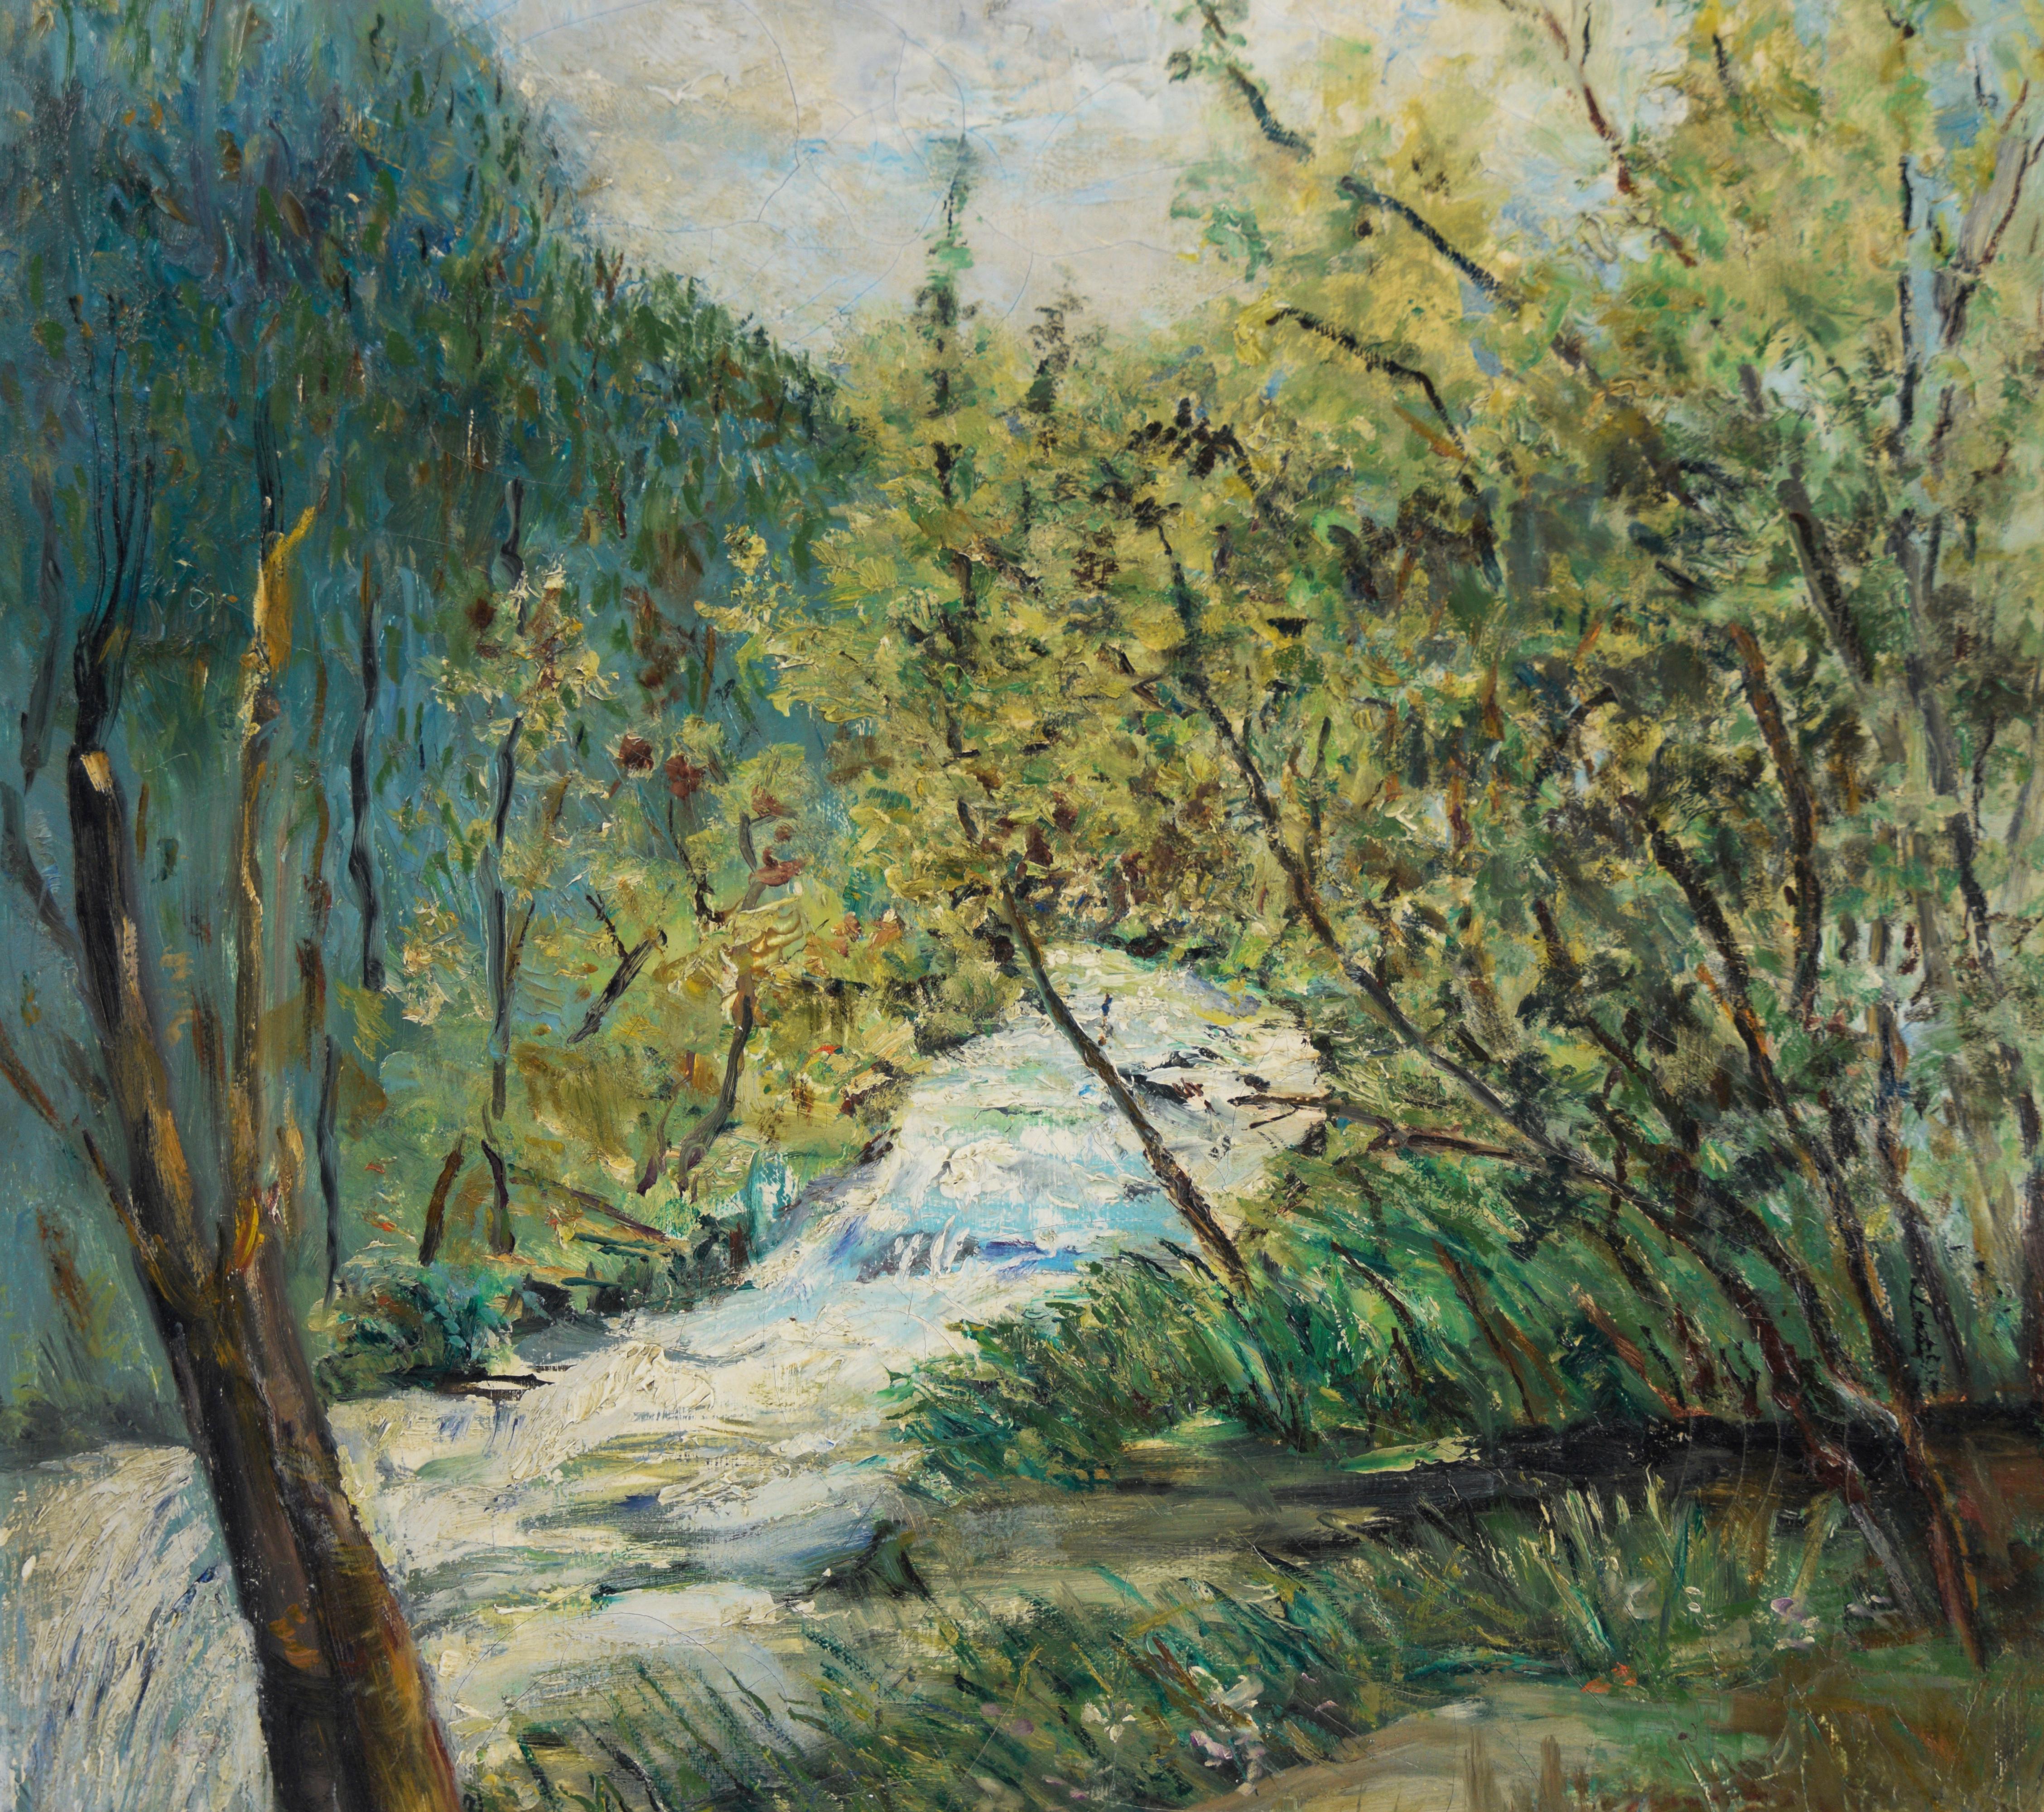 A Quiet River - Oil on Canvas by A. Whipple - Painting by Unknown